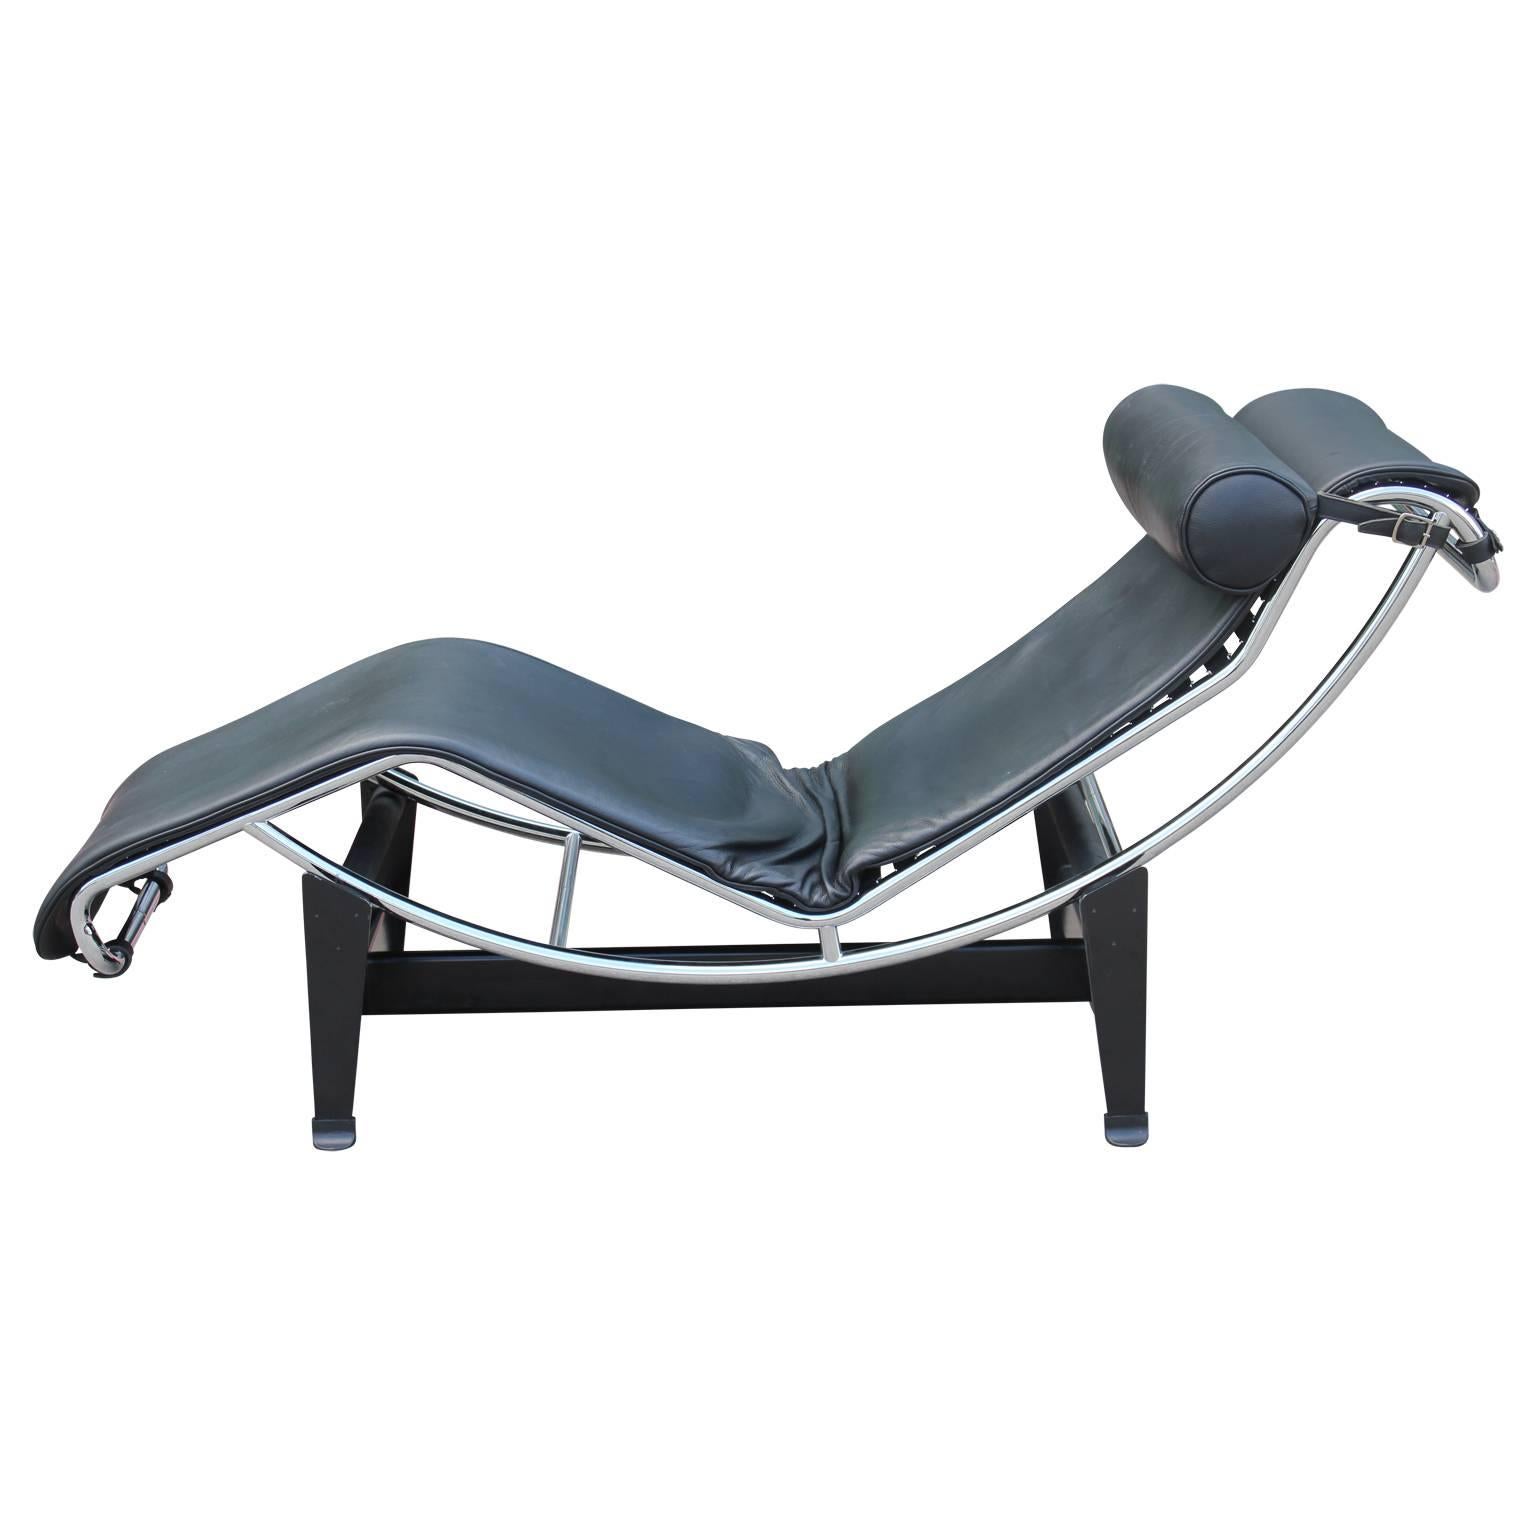 Gorgeous Le Corbusier chaise longue made by Cassina. It is signed and etched and in excellent shape. The lounge chair is adjustable as it is not connected to the base so you can make it as horizontal as you wish.